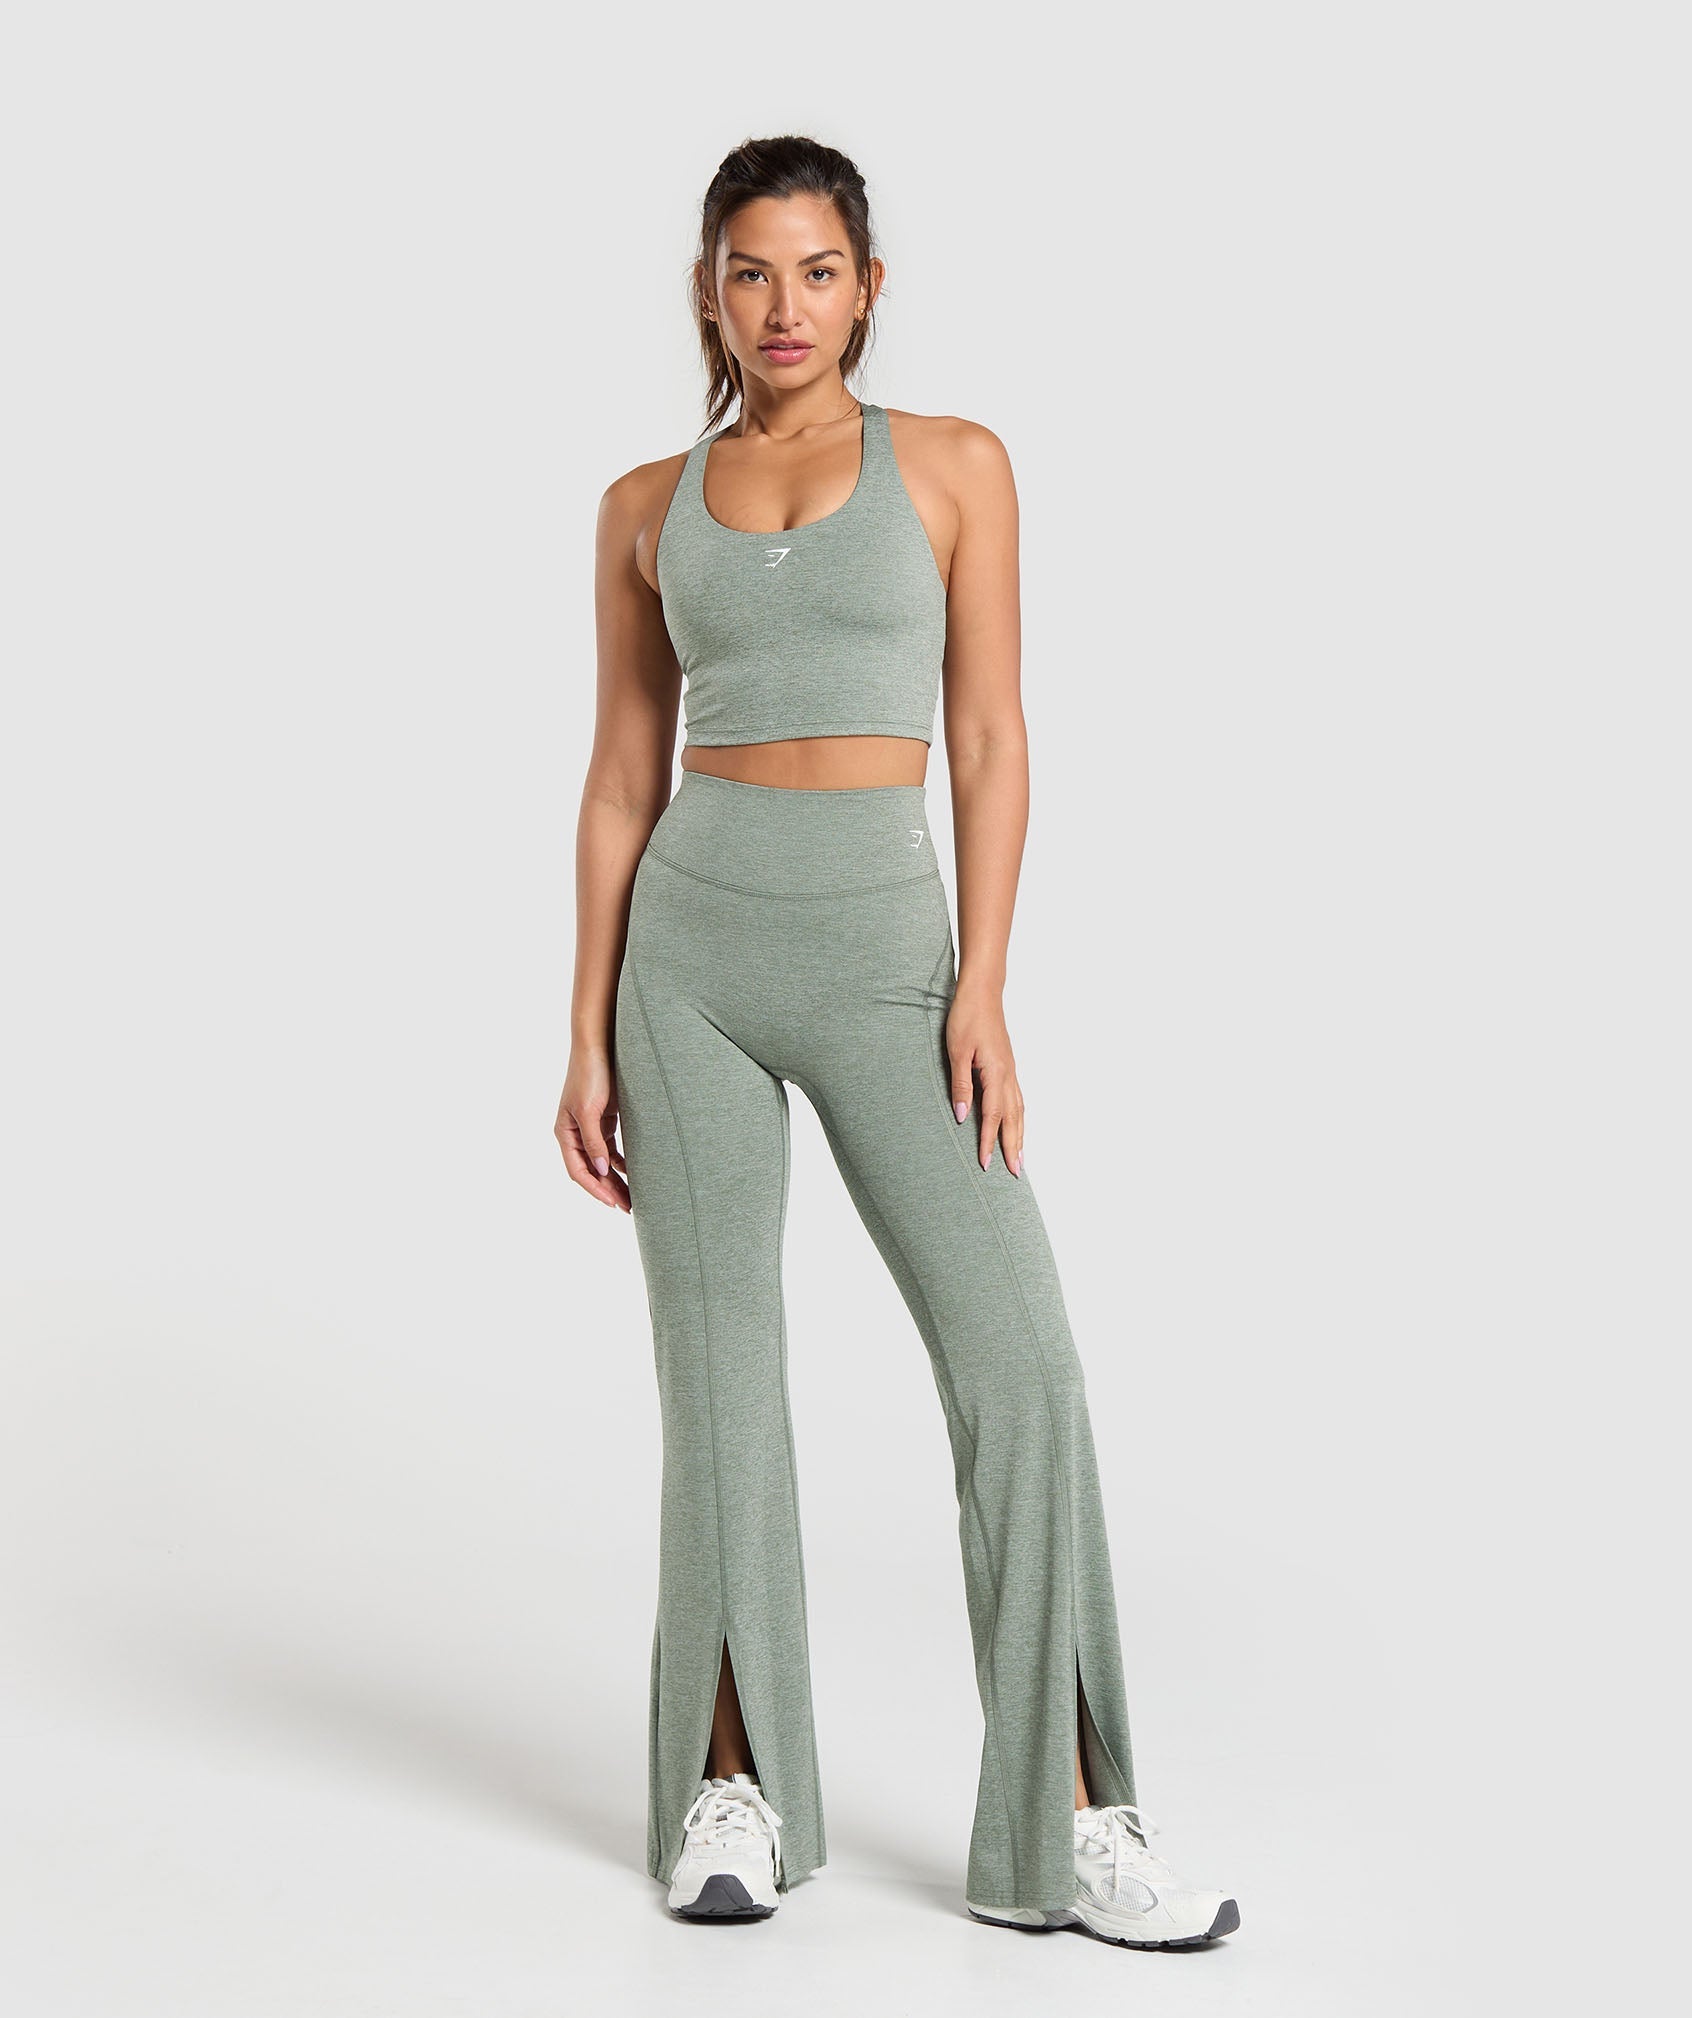 Marl Flared Leggings in Unit Green - view 4